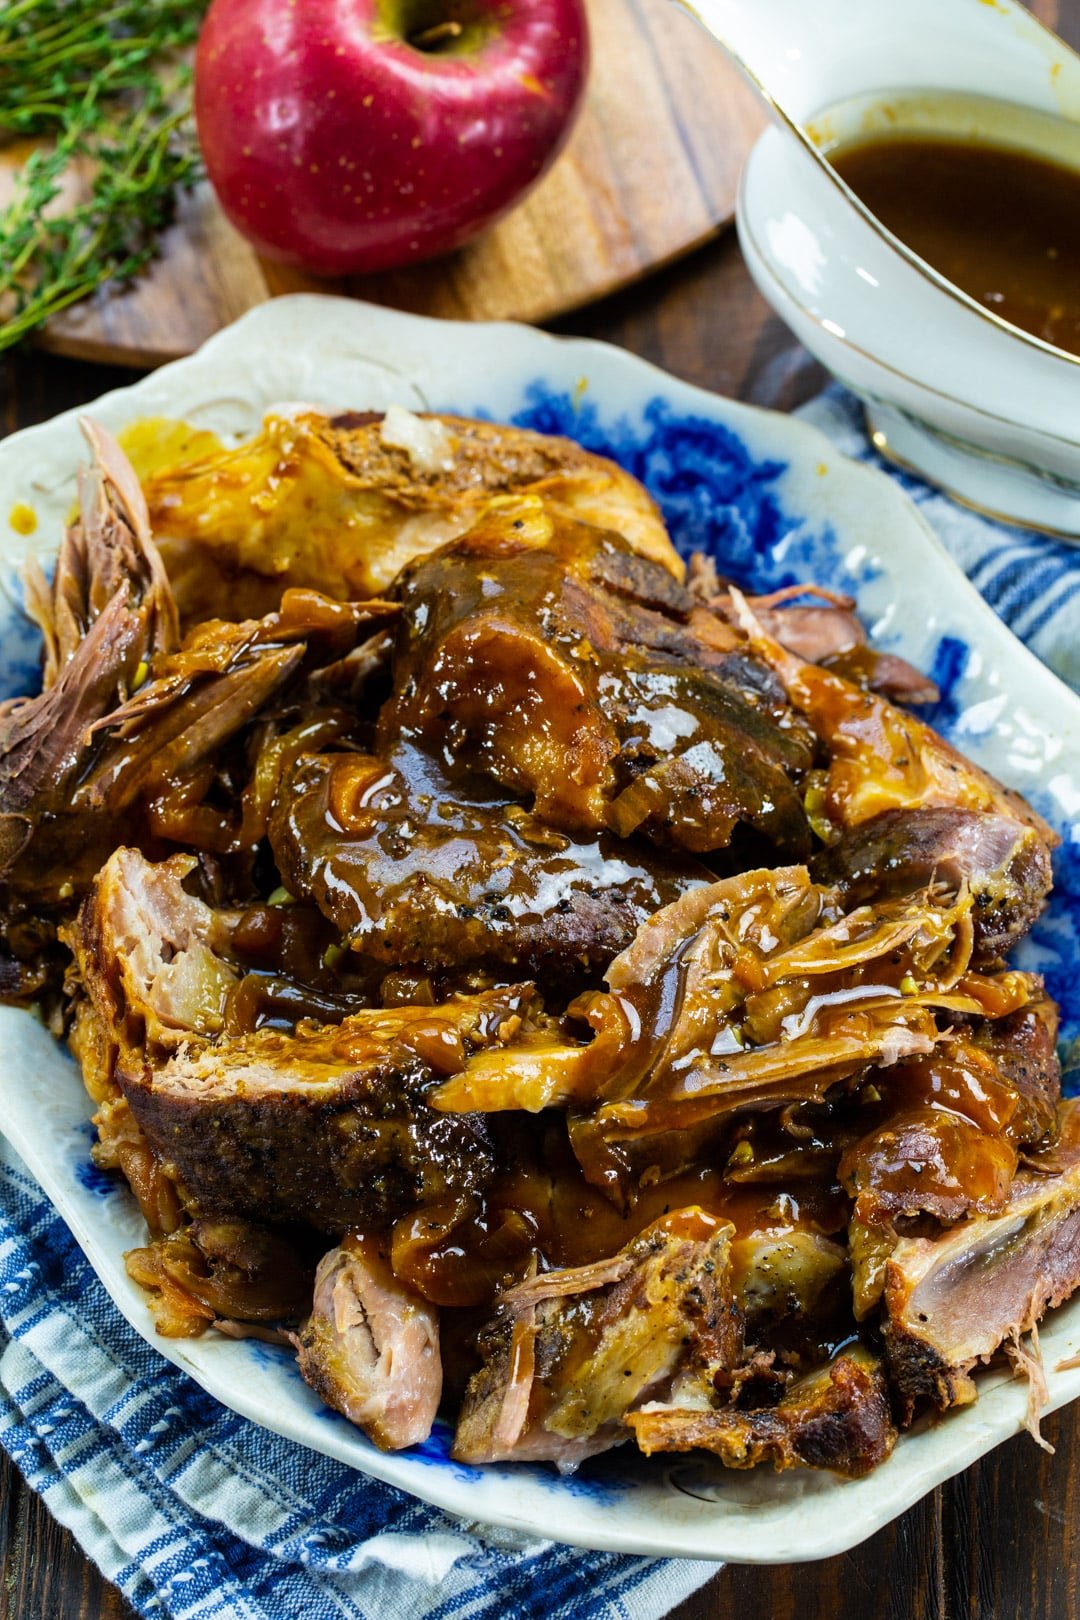 Apple Cider Pork pulled into pieces with apple and gravy in background.